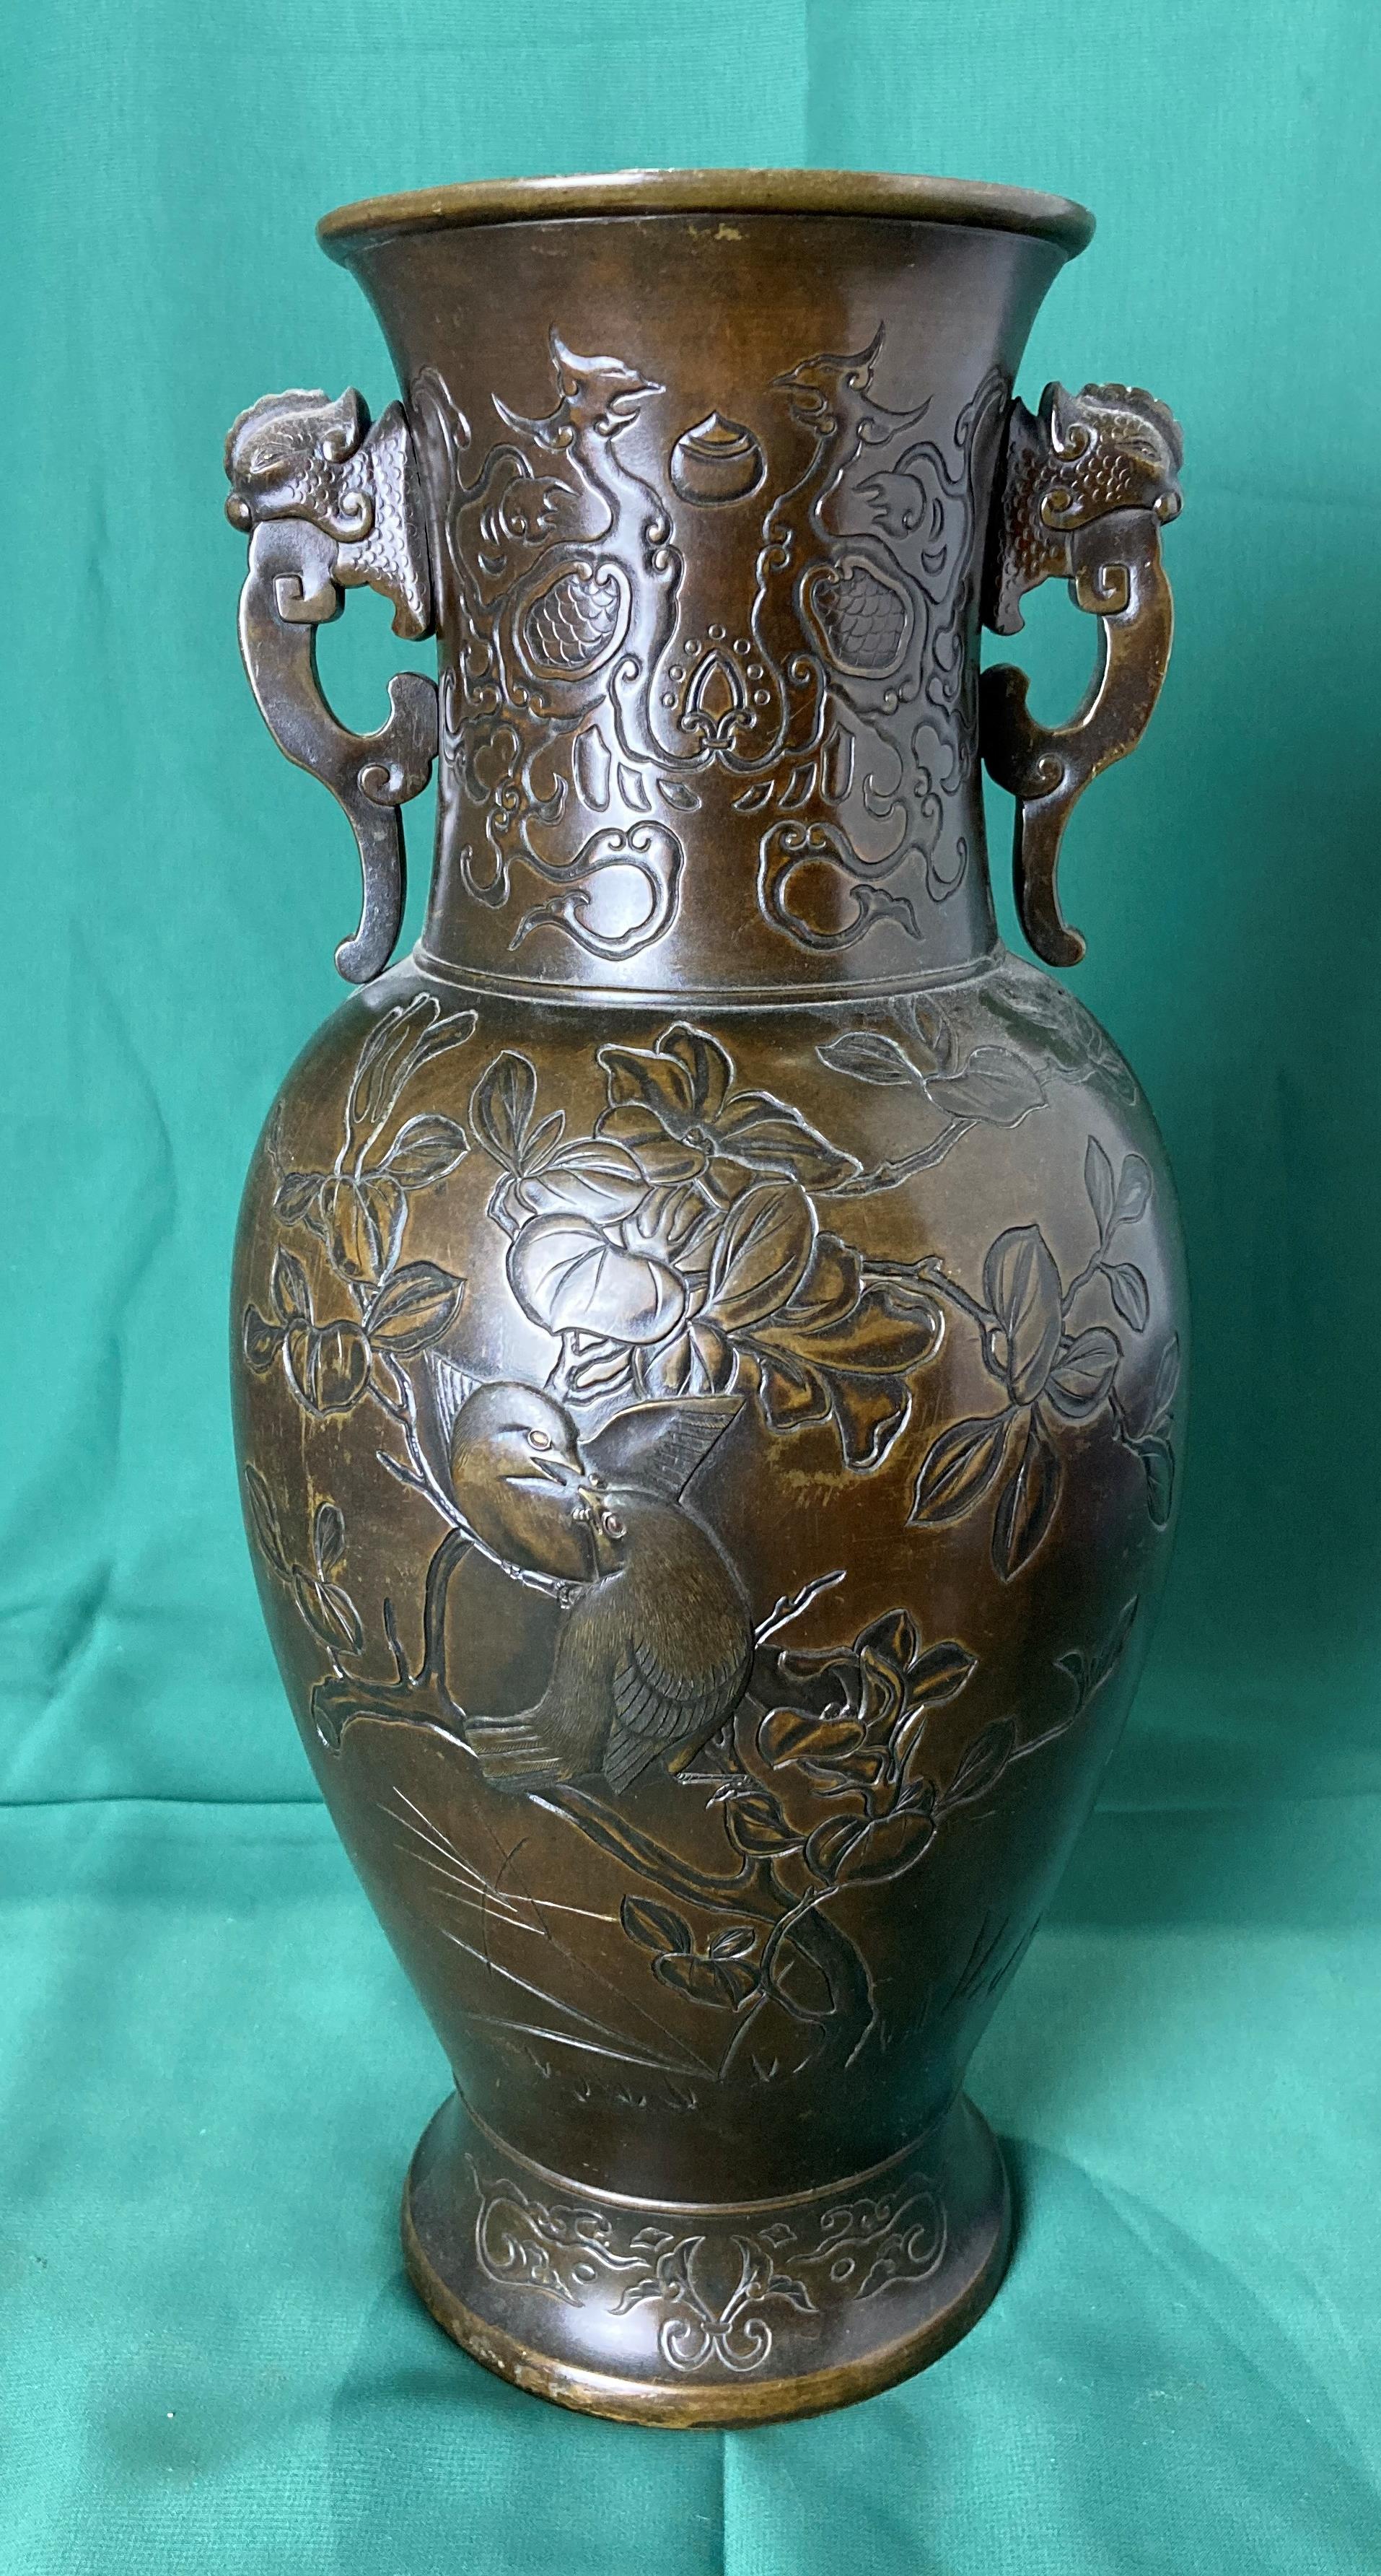 A bronze Oriental vase with engraved details of birds and floral designs and lugged handles, 34.